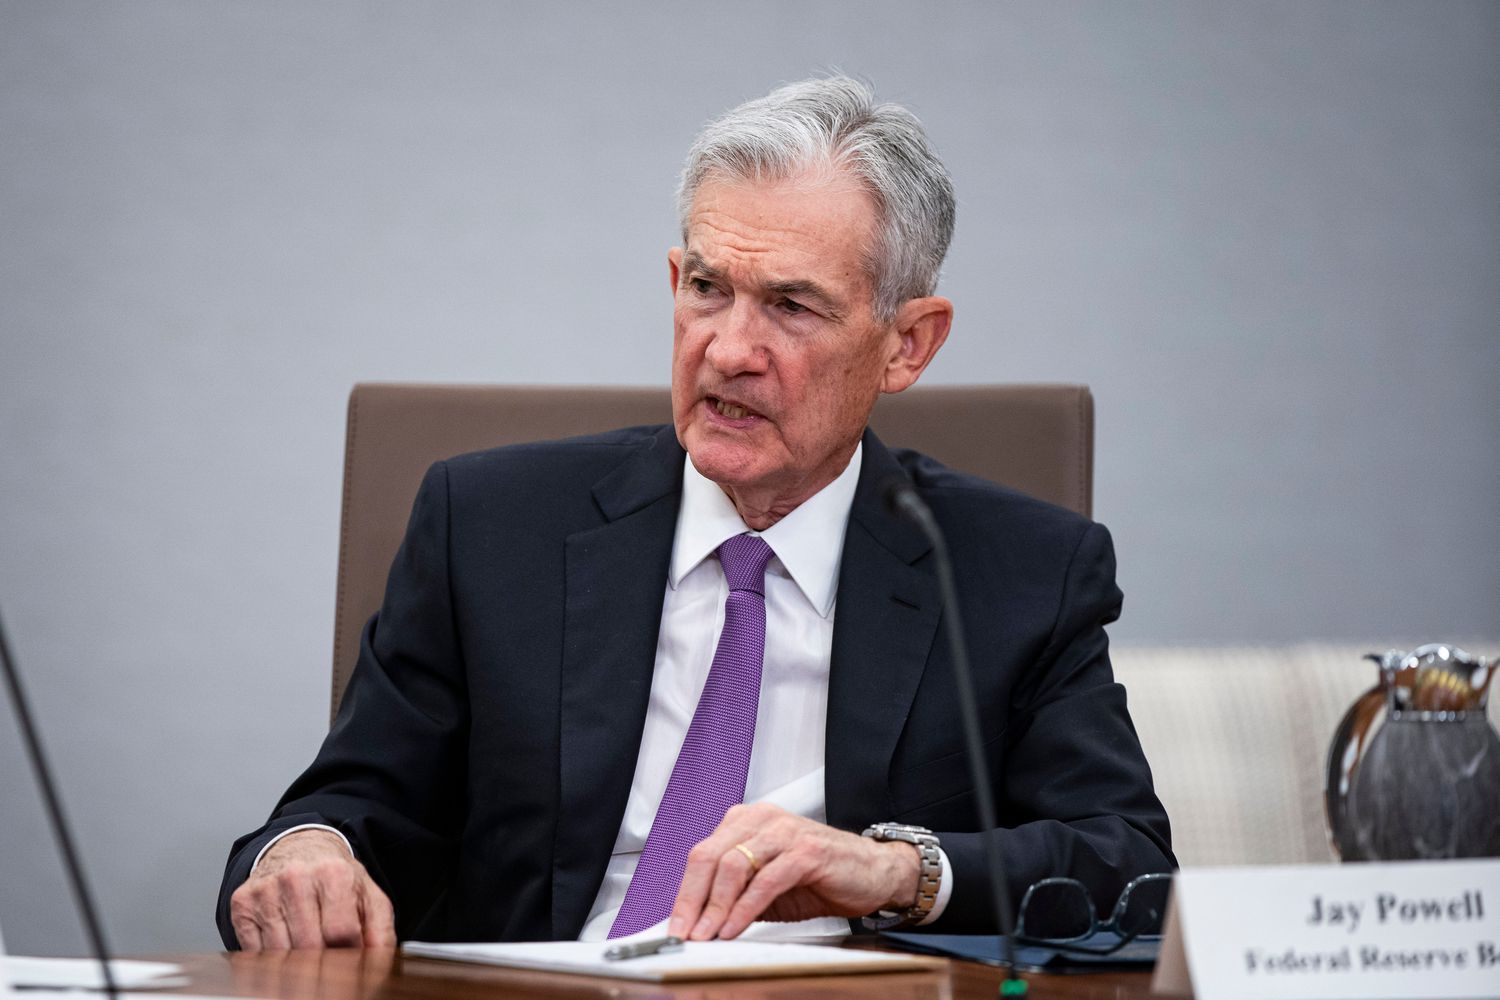 Latest Inflation Data Leaves Fed in Wait-and-See Mode, Powell Says [Video]